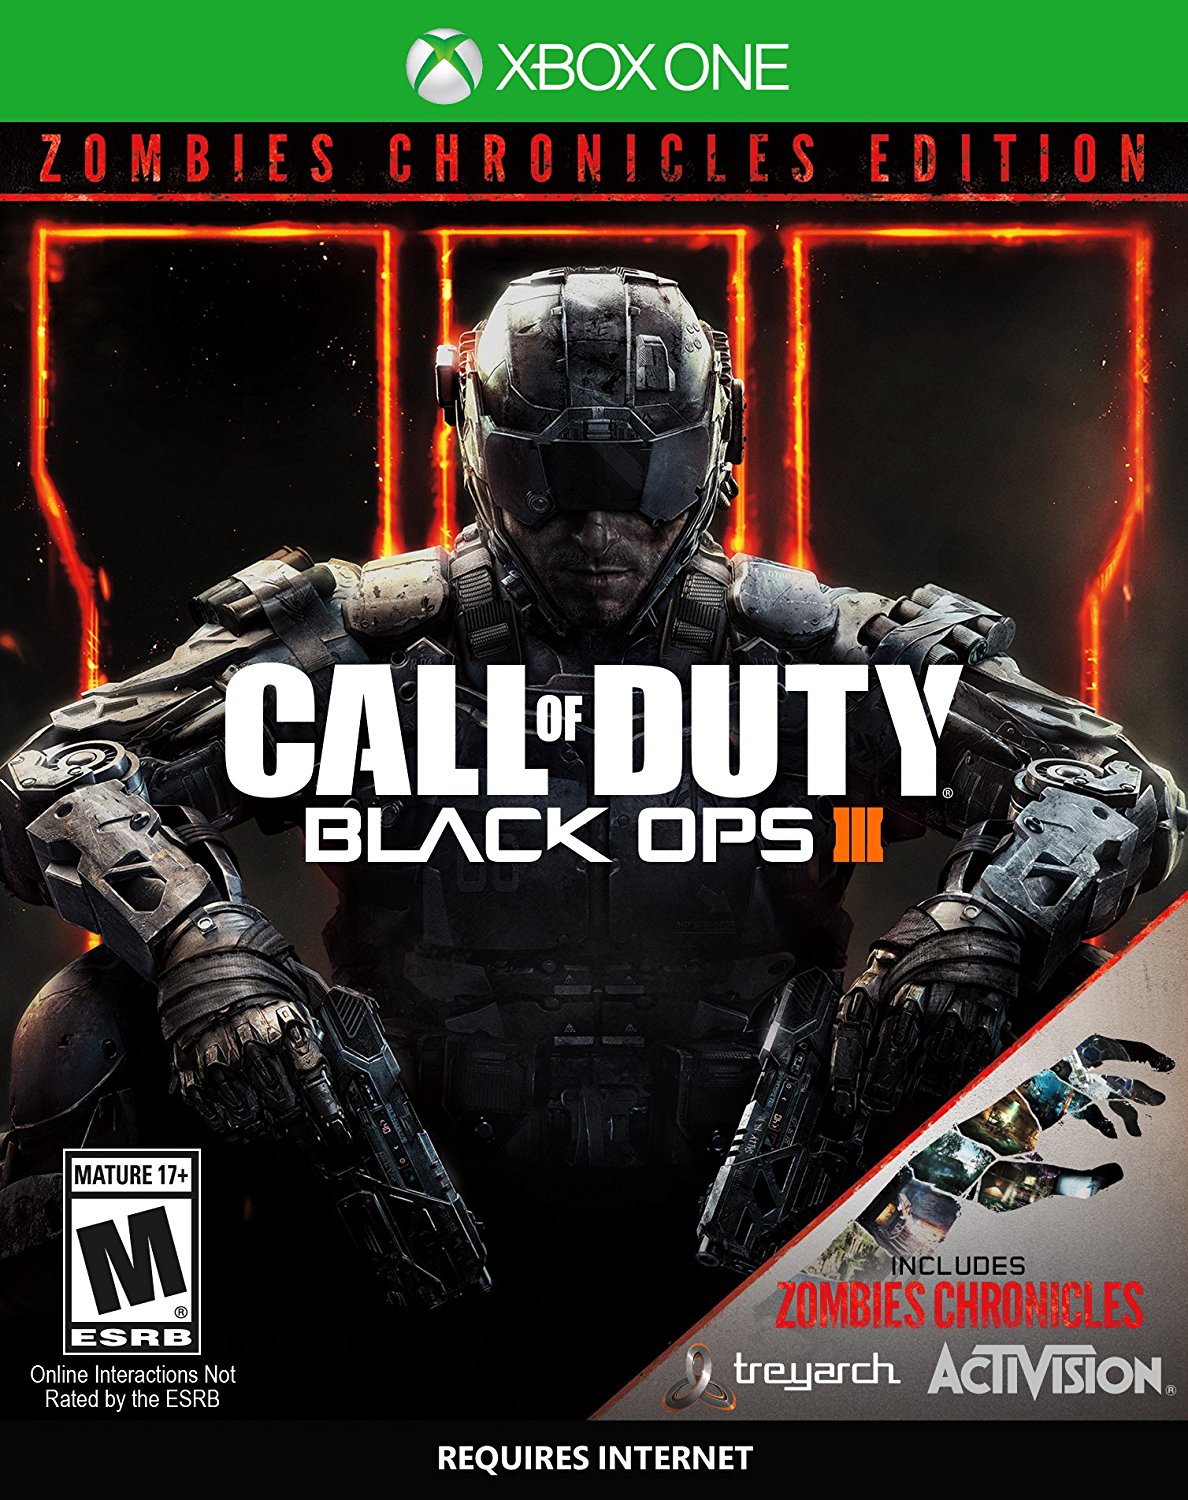 Call of Duty: Black Ops 3 Zombie Chronicles Edition, Activision, Xbox One, 047875881228 - image 1 of 4